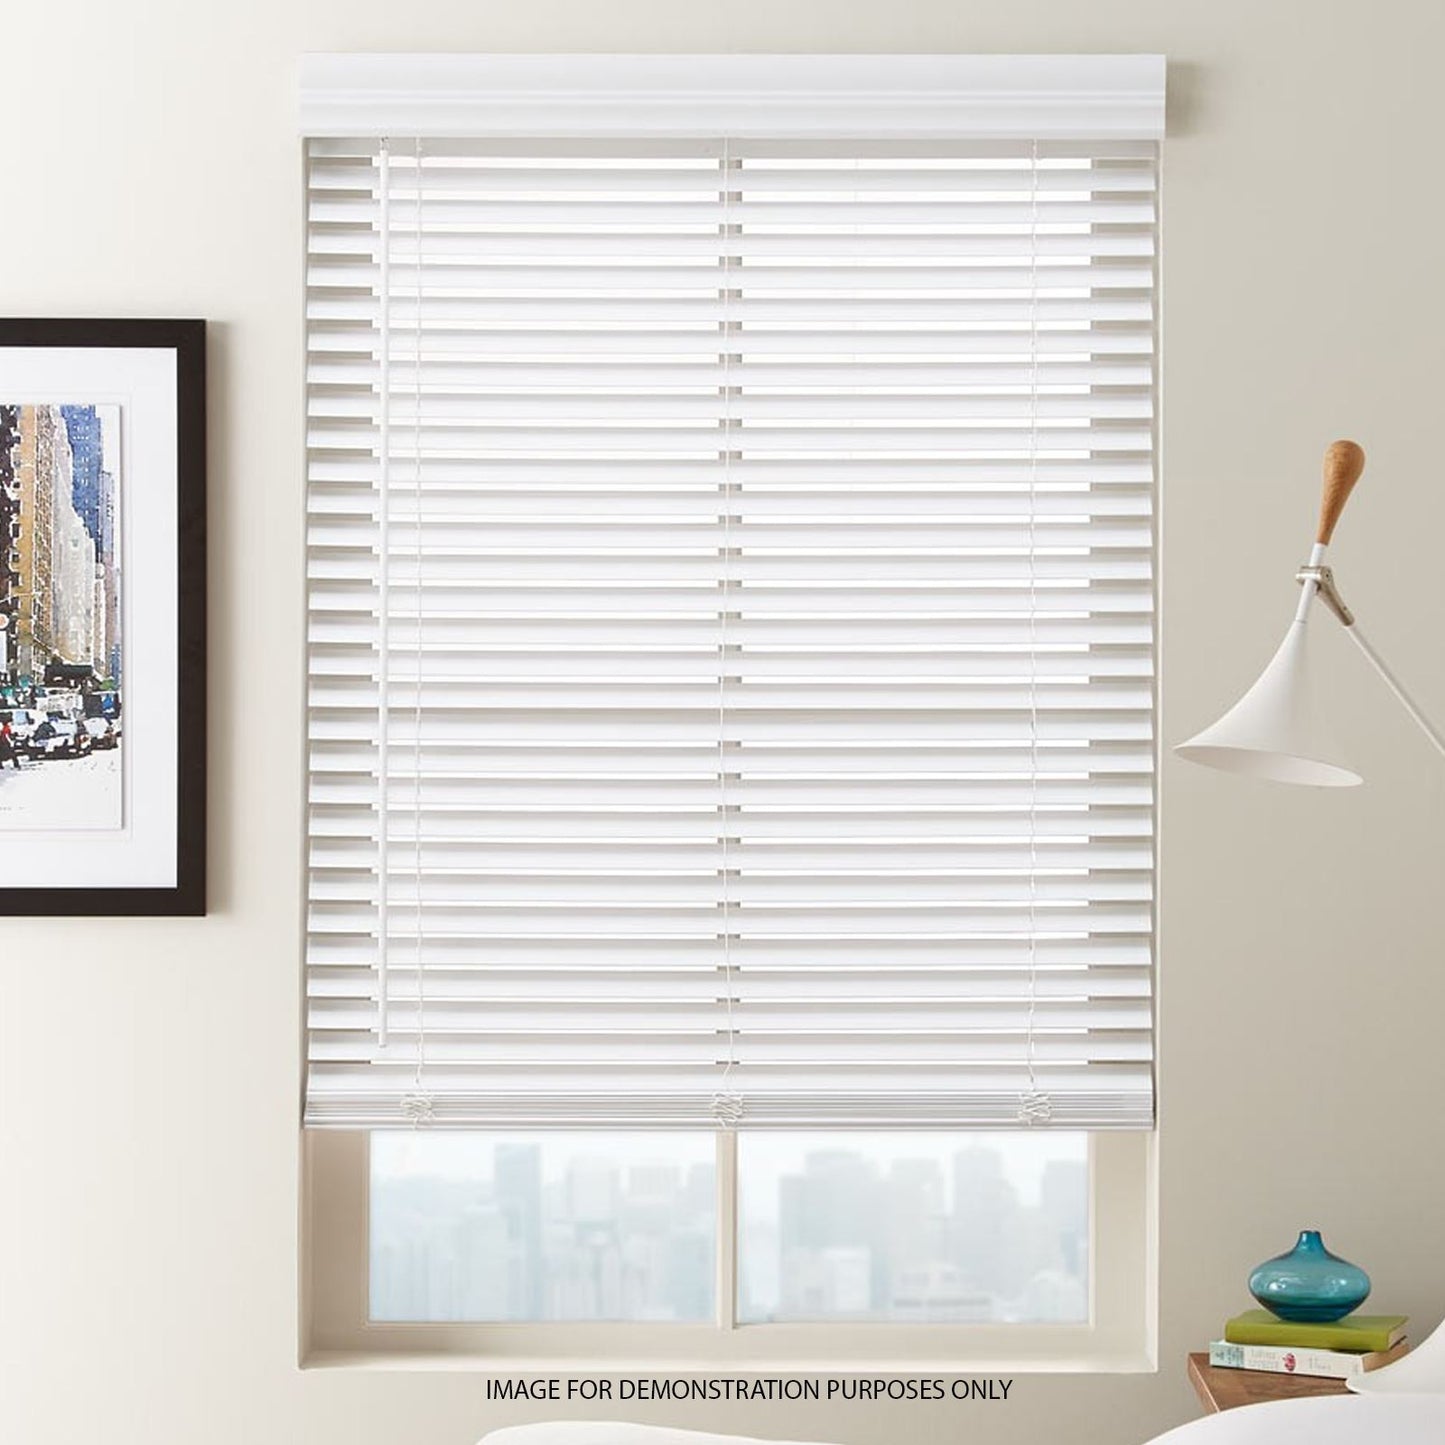 Control Light and Privacy with Customizable PVC Blinds